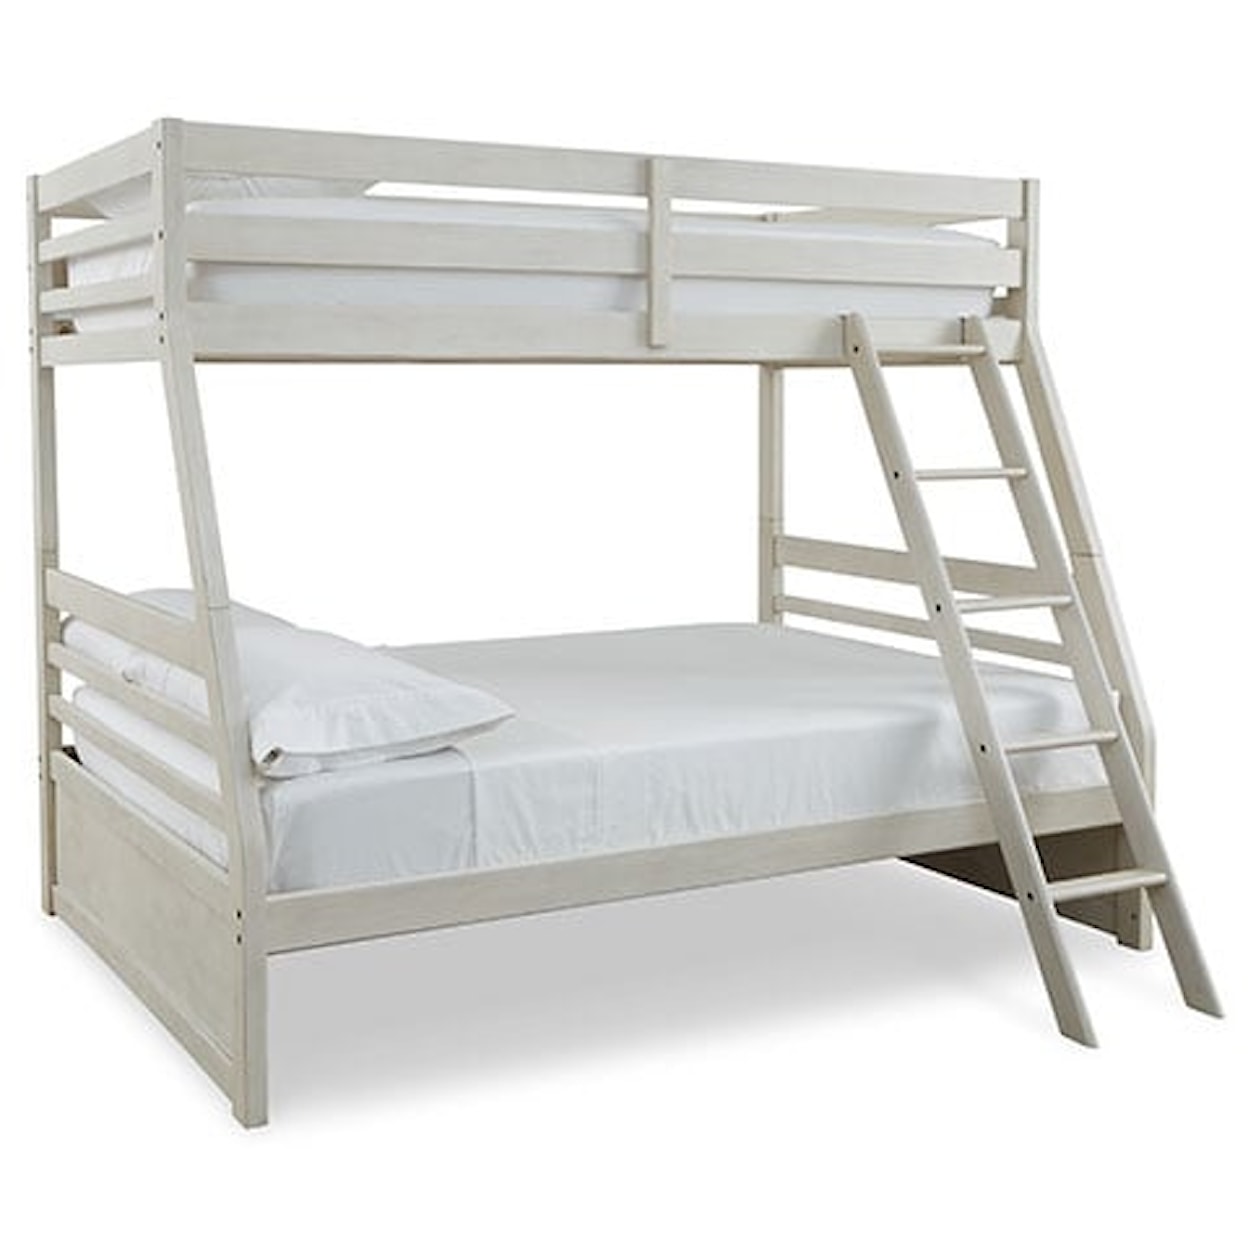 Benchcraft Robbinsdale Twin/Full Bunk Bed